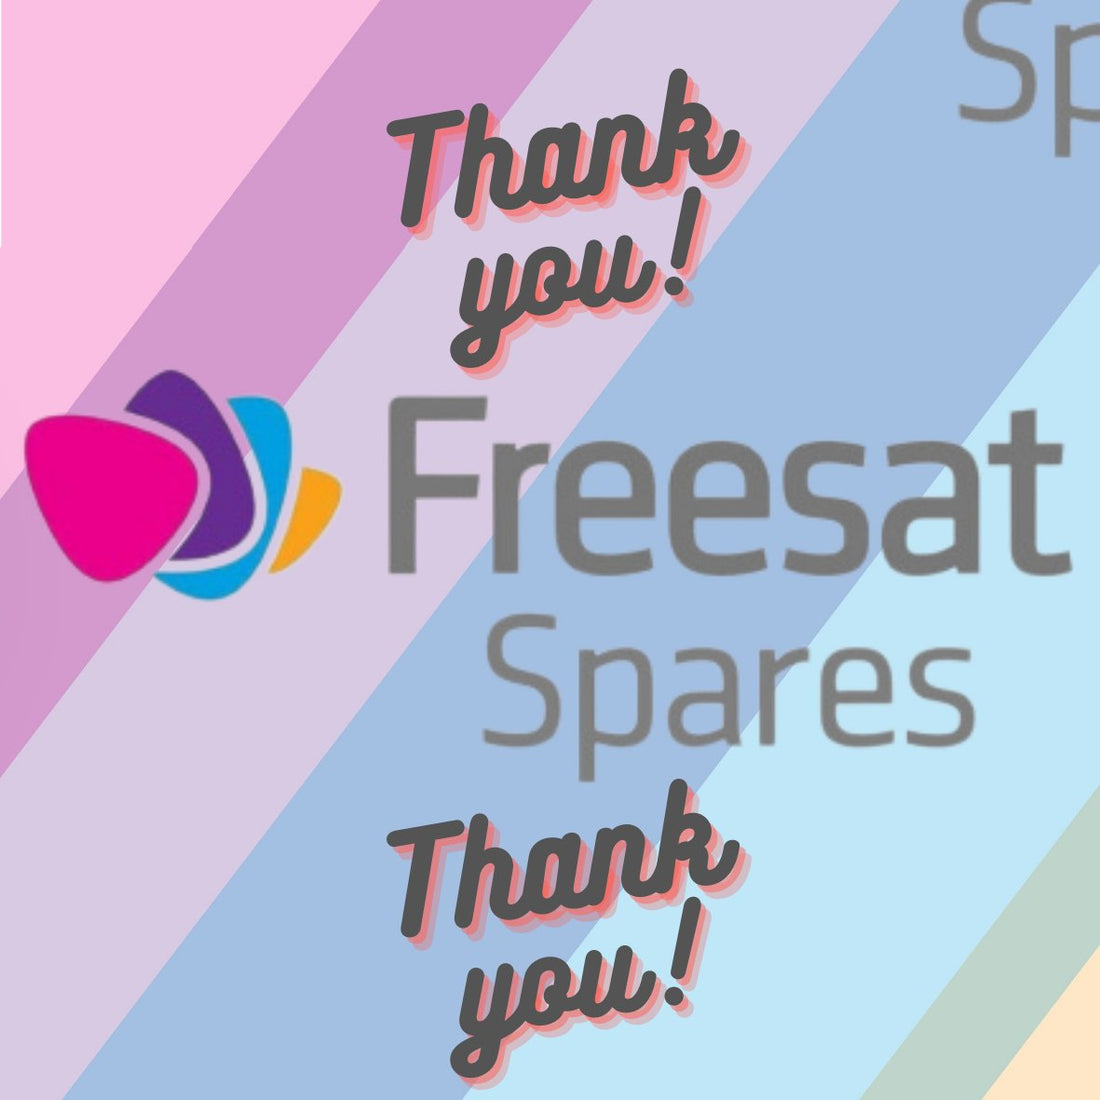 Why has my Freesat box stopped working? - Freesat Spares